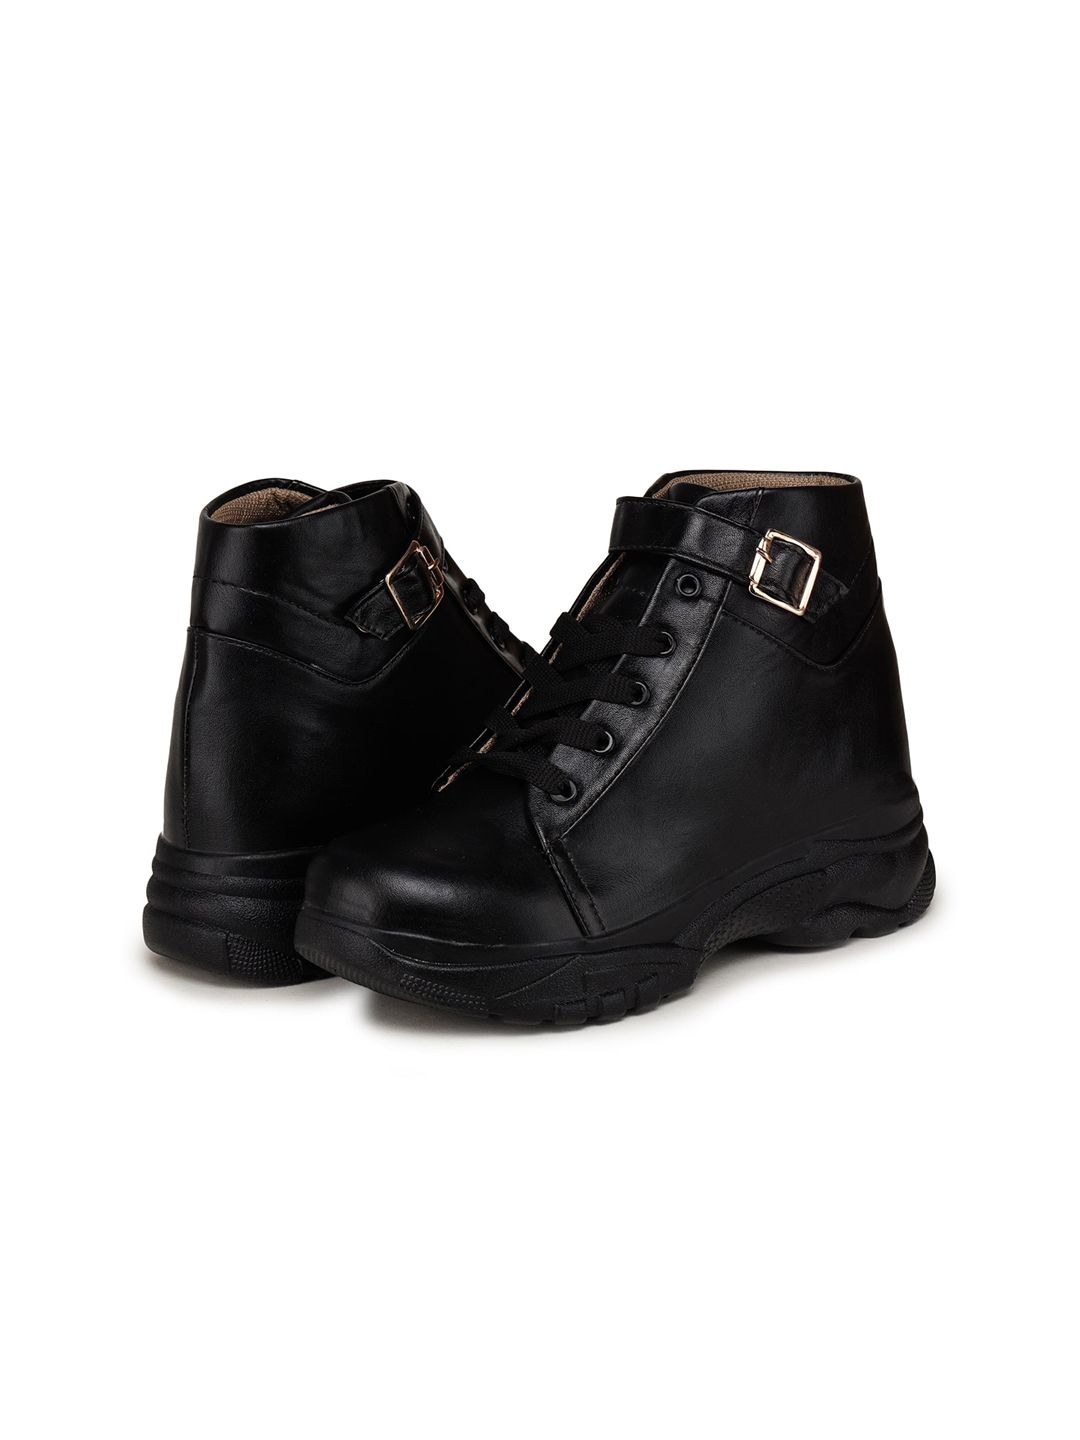 BOOTCO Women Black Solid Mid-Top Flat Boots Price in India